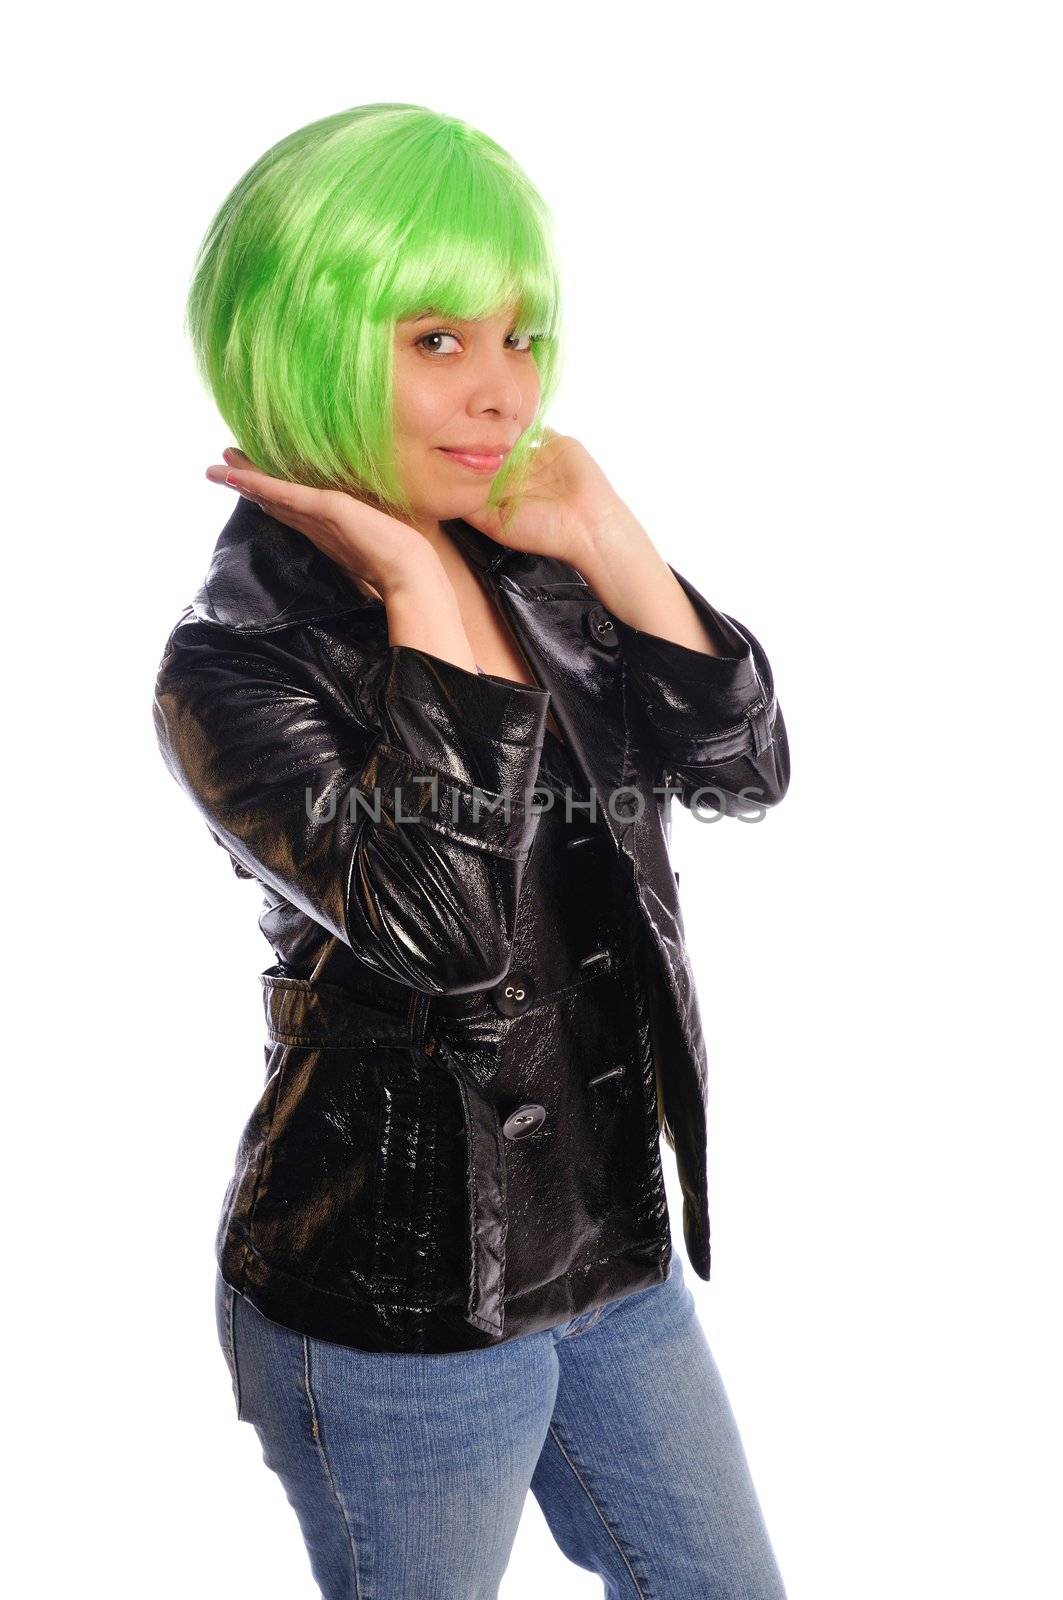 green hair girl by PDImages